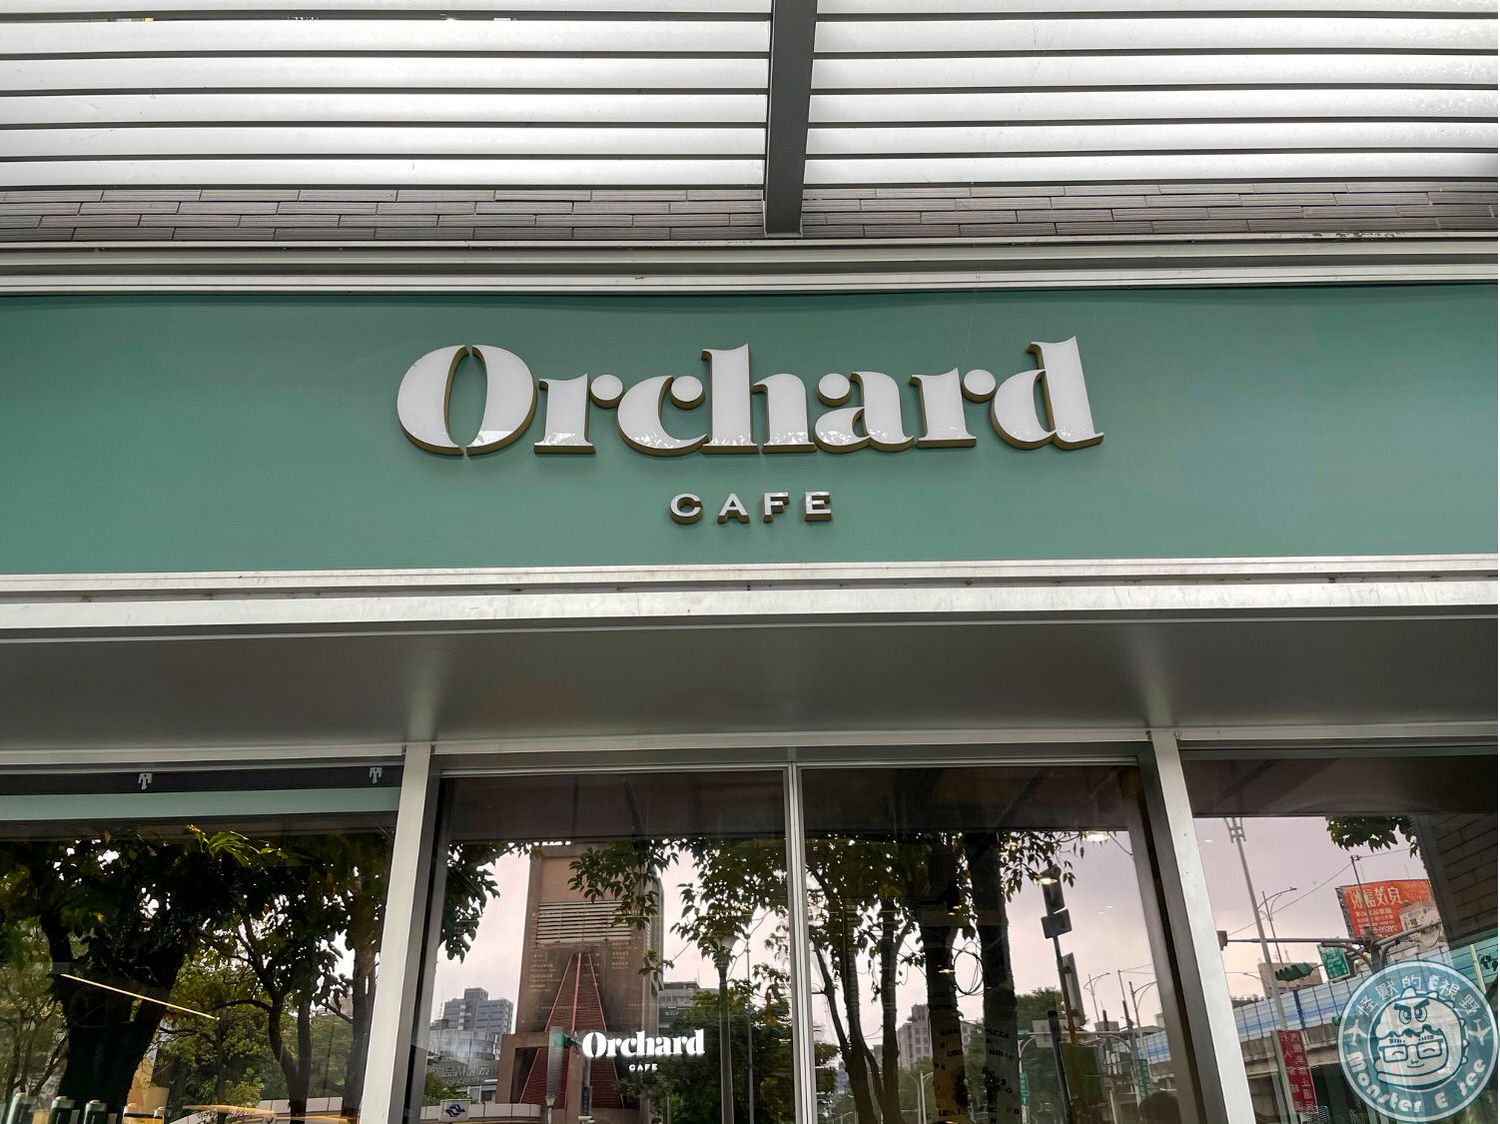 Orchard cafe01